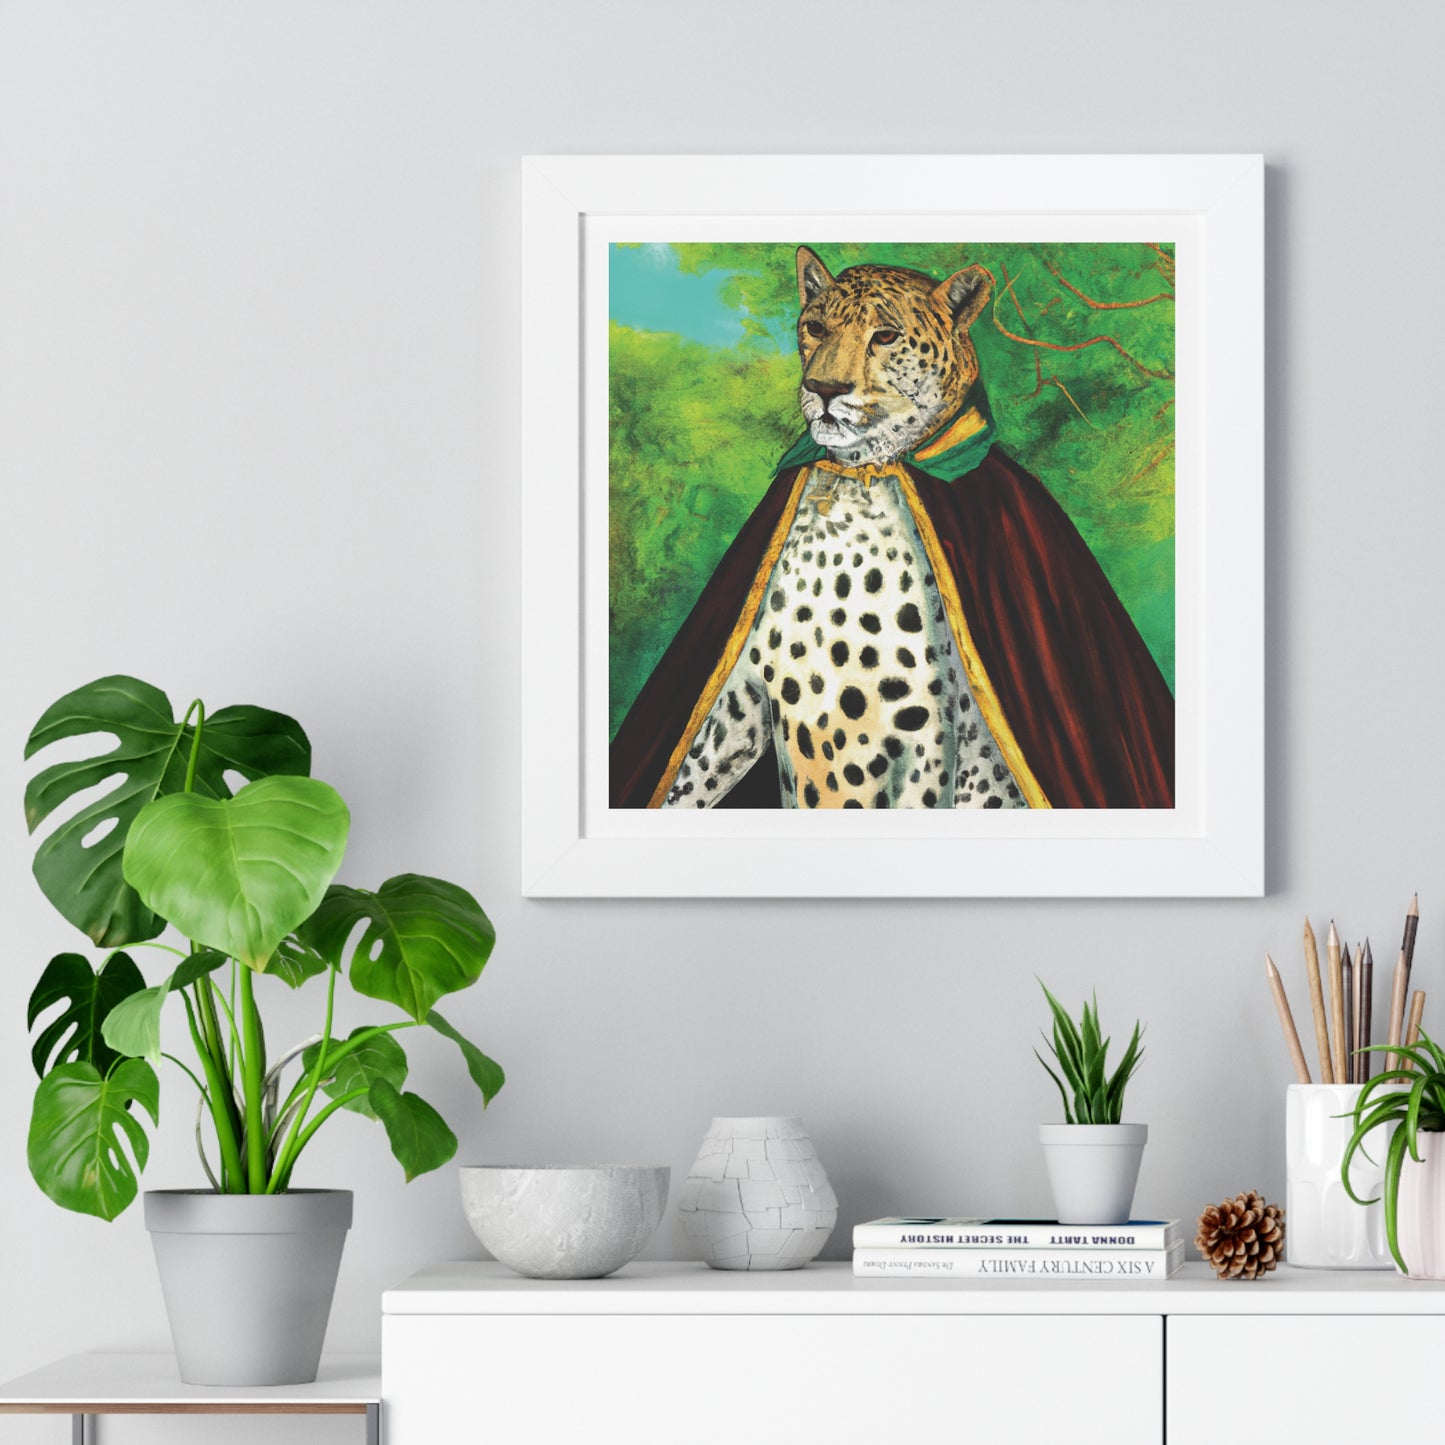 Royal Leopard in Red Robe Framed Poster Wall Art